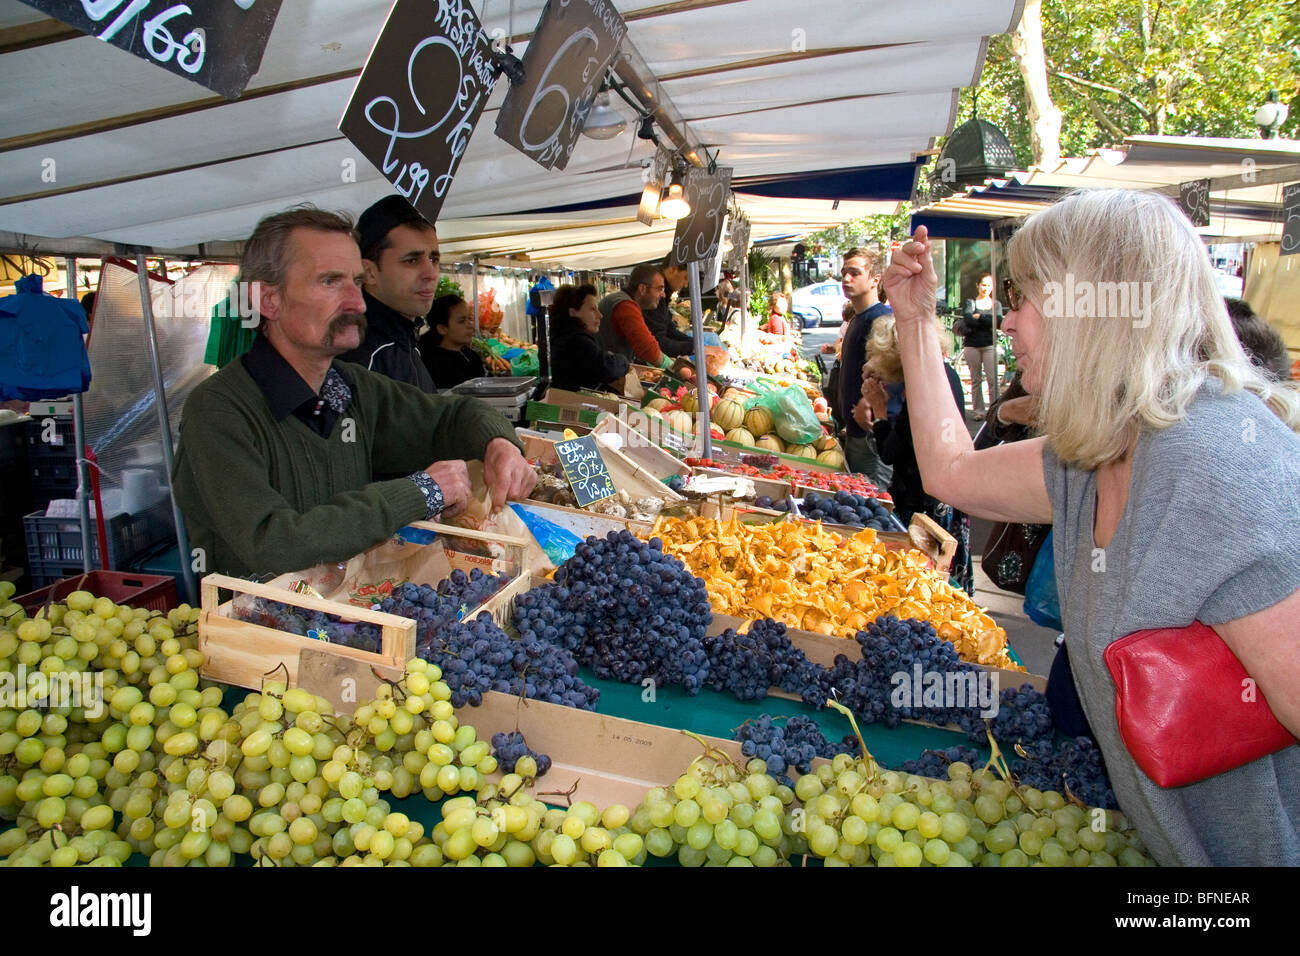 People shopping for produce at an outdoor Saturday market in Paris, France. Stock Photo